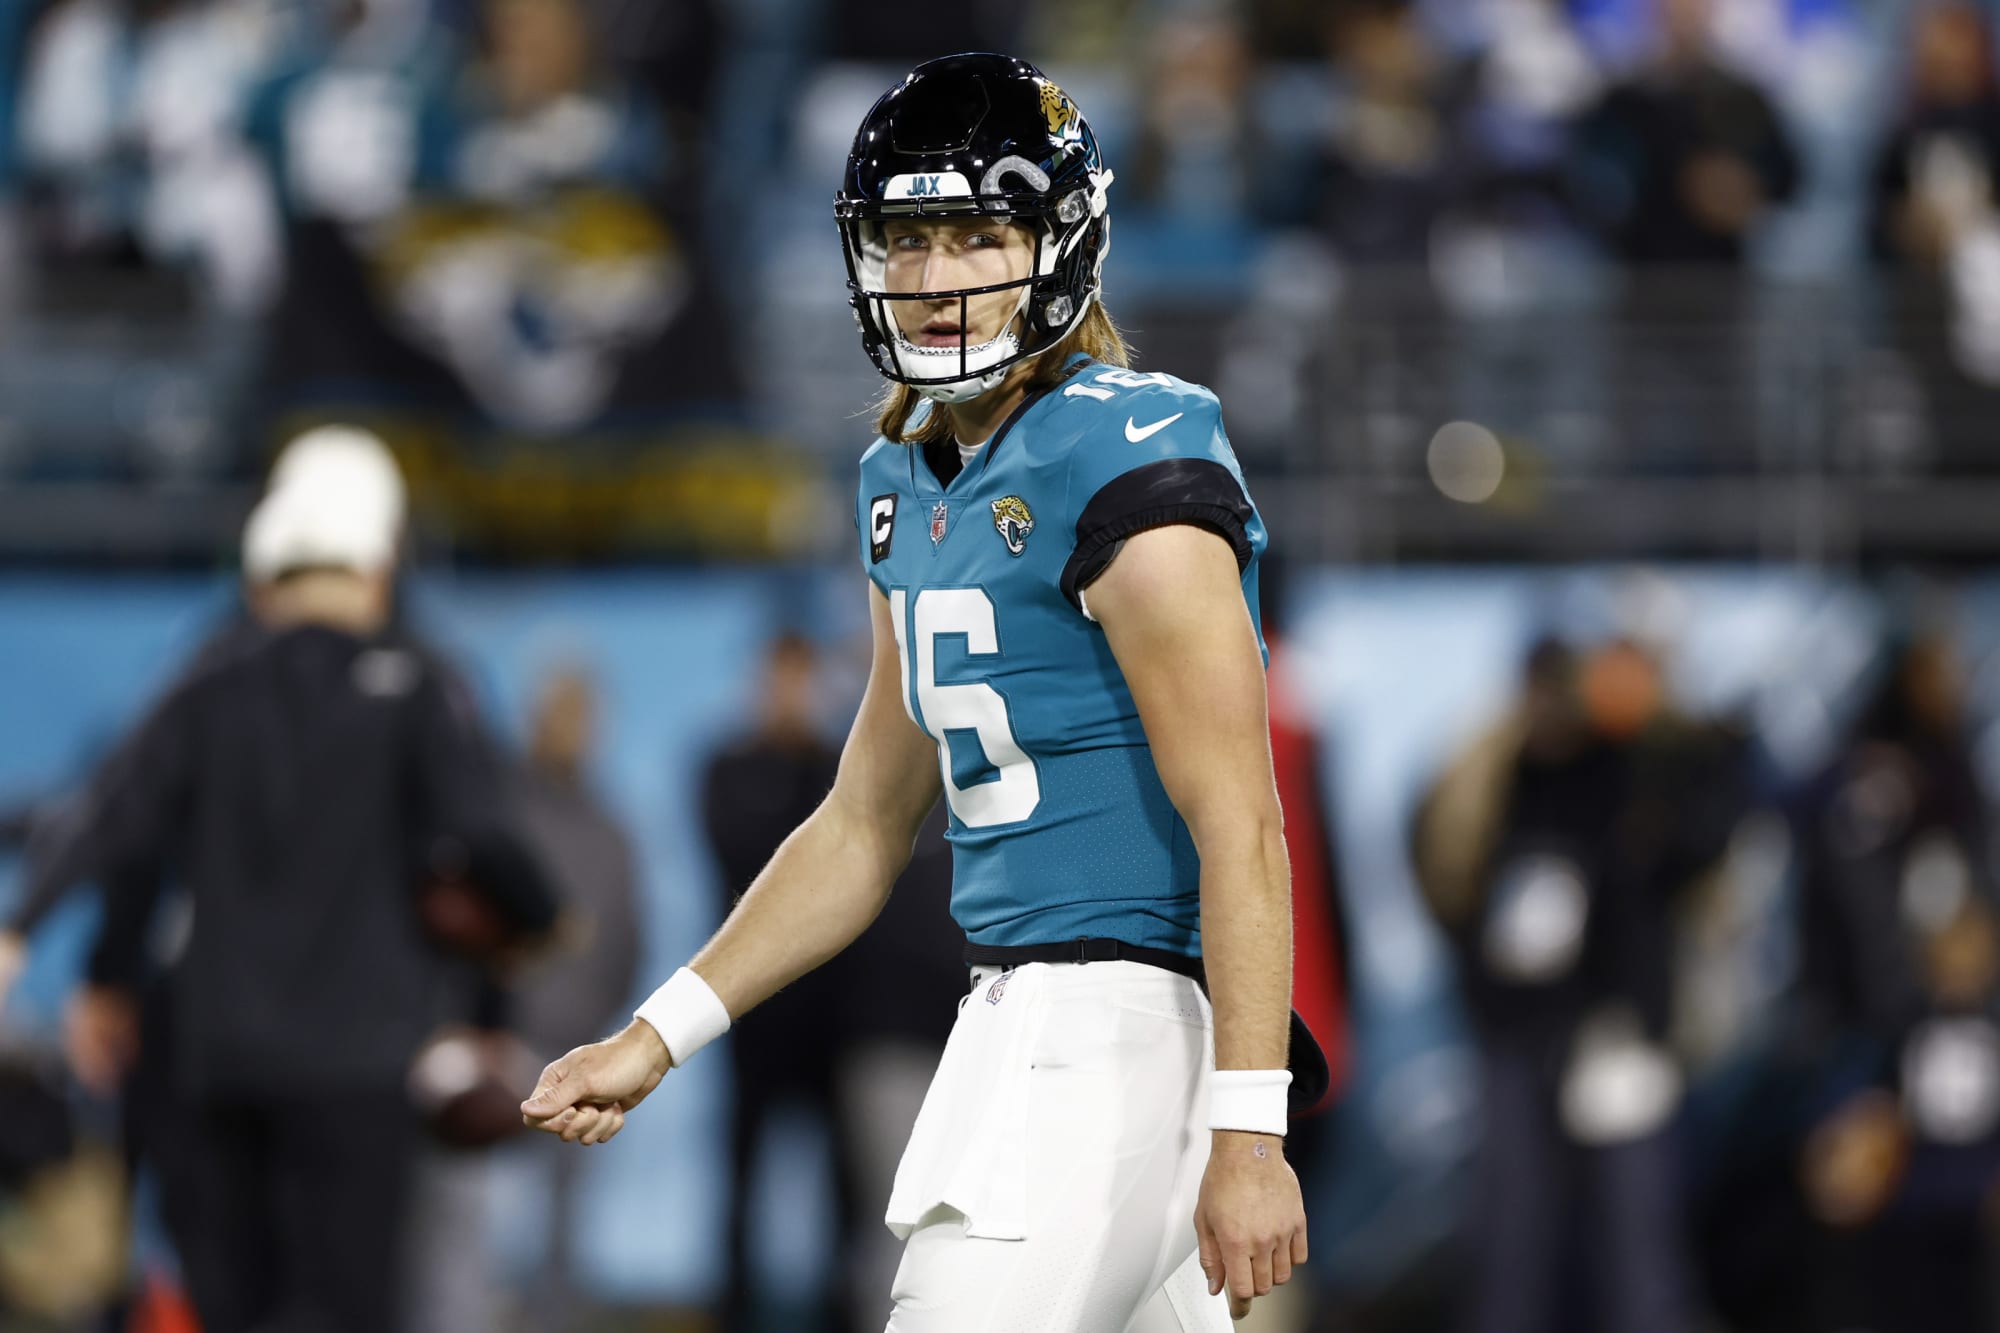 Trevor Lawrence interceptions have Jags QB getting dragged for playoff debut